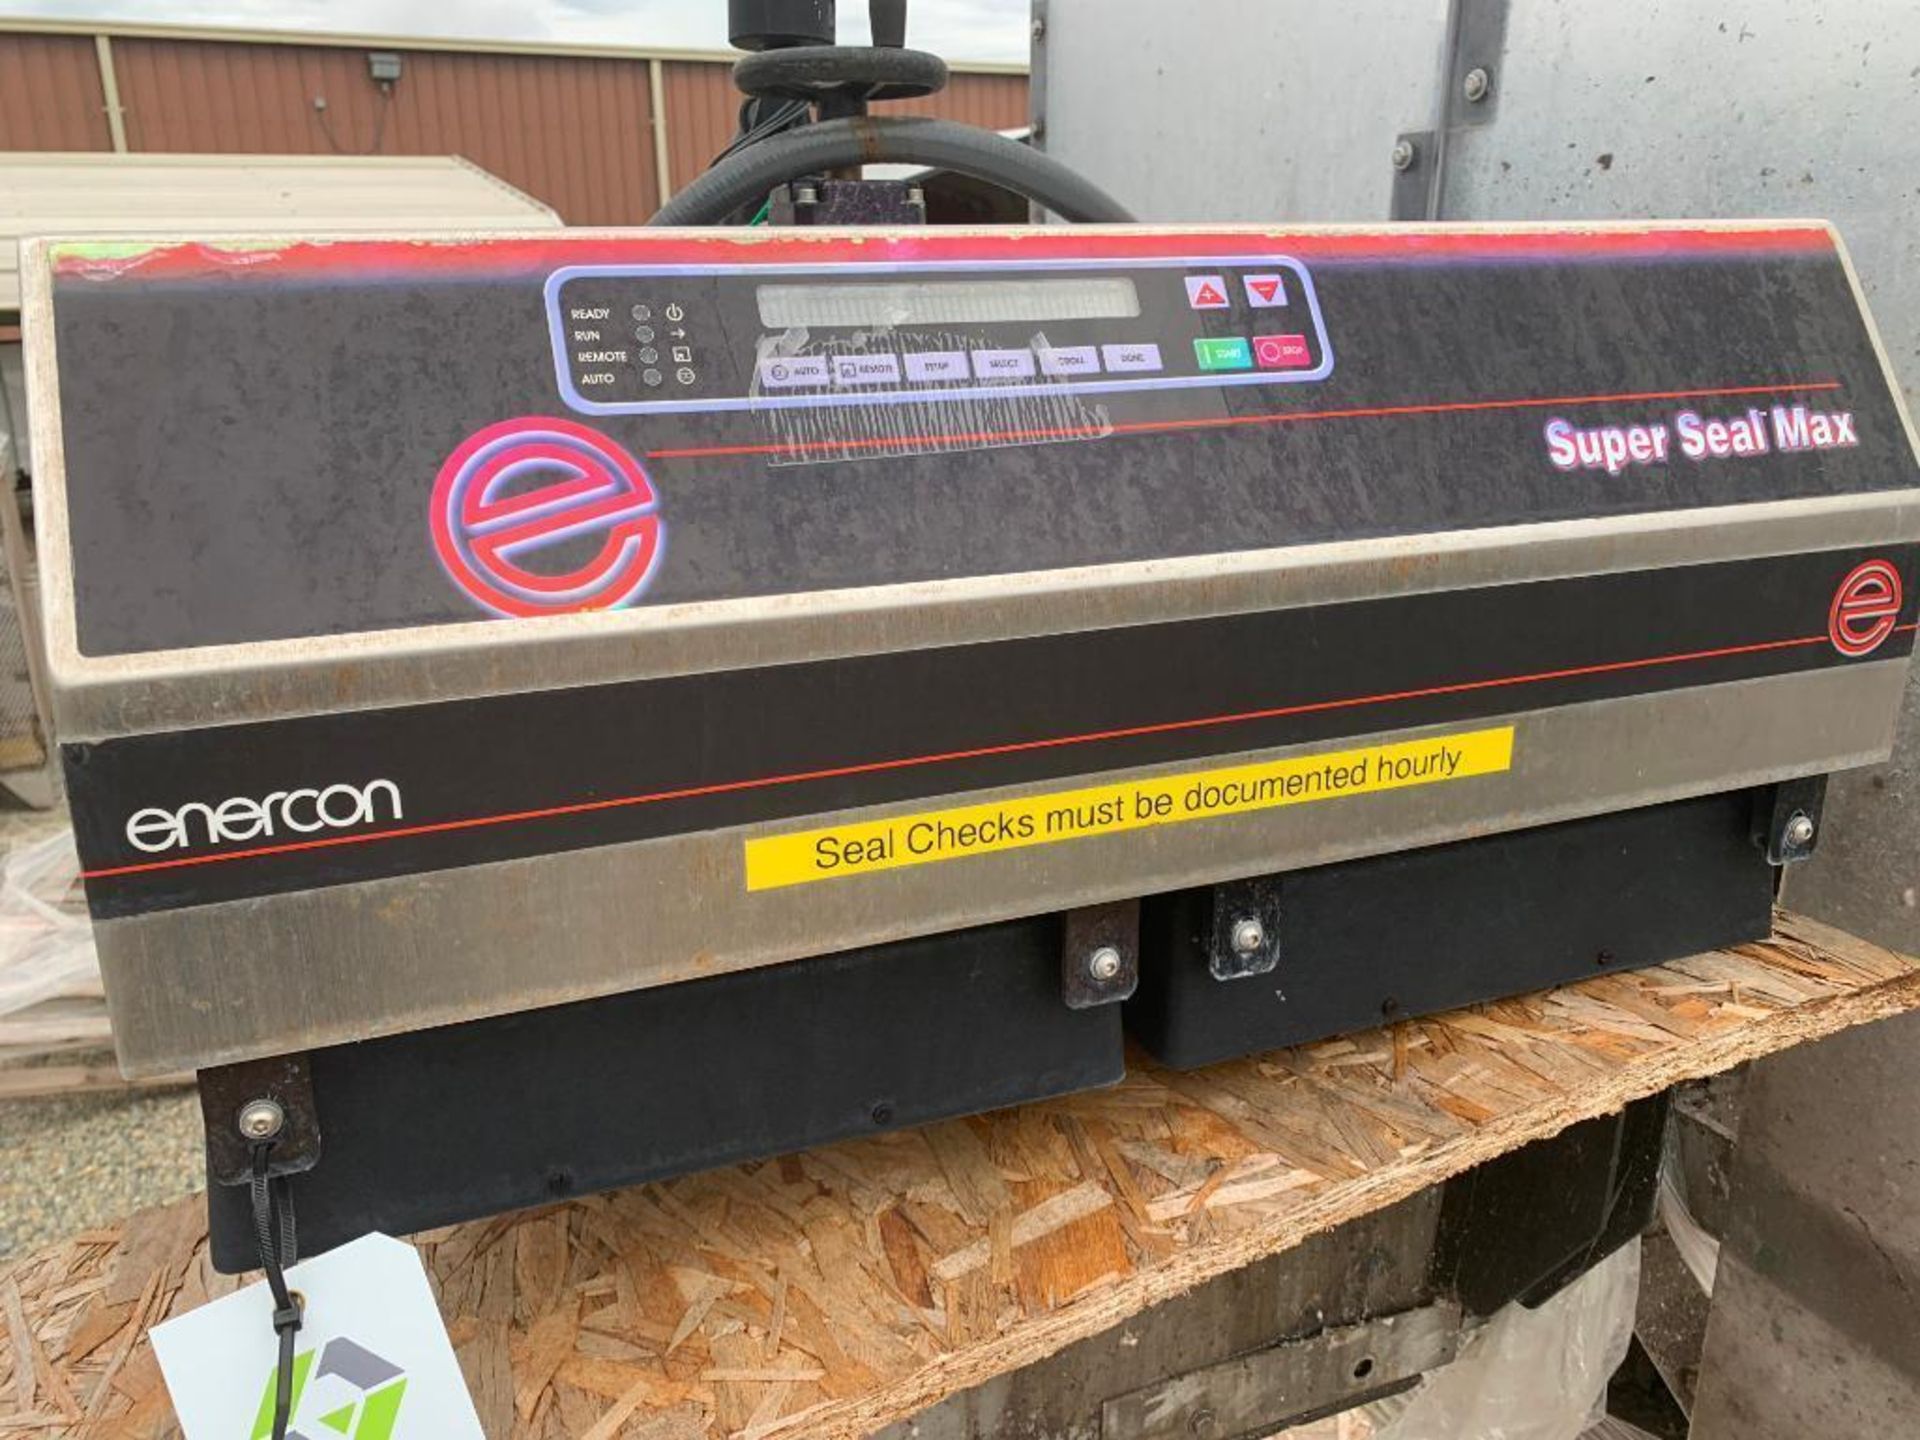 Enercon super seal max induction sealer. (Located in Faison, NC) - Image 5 of 10